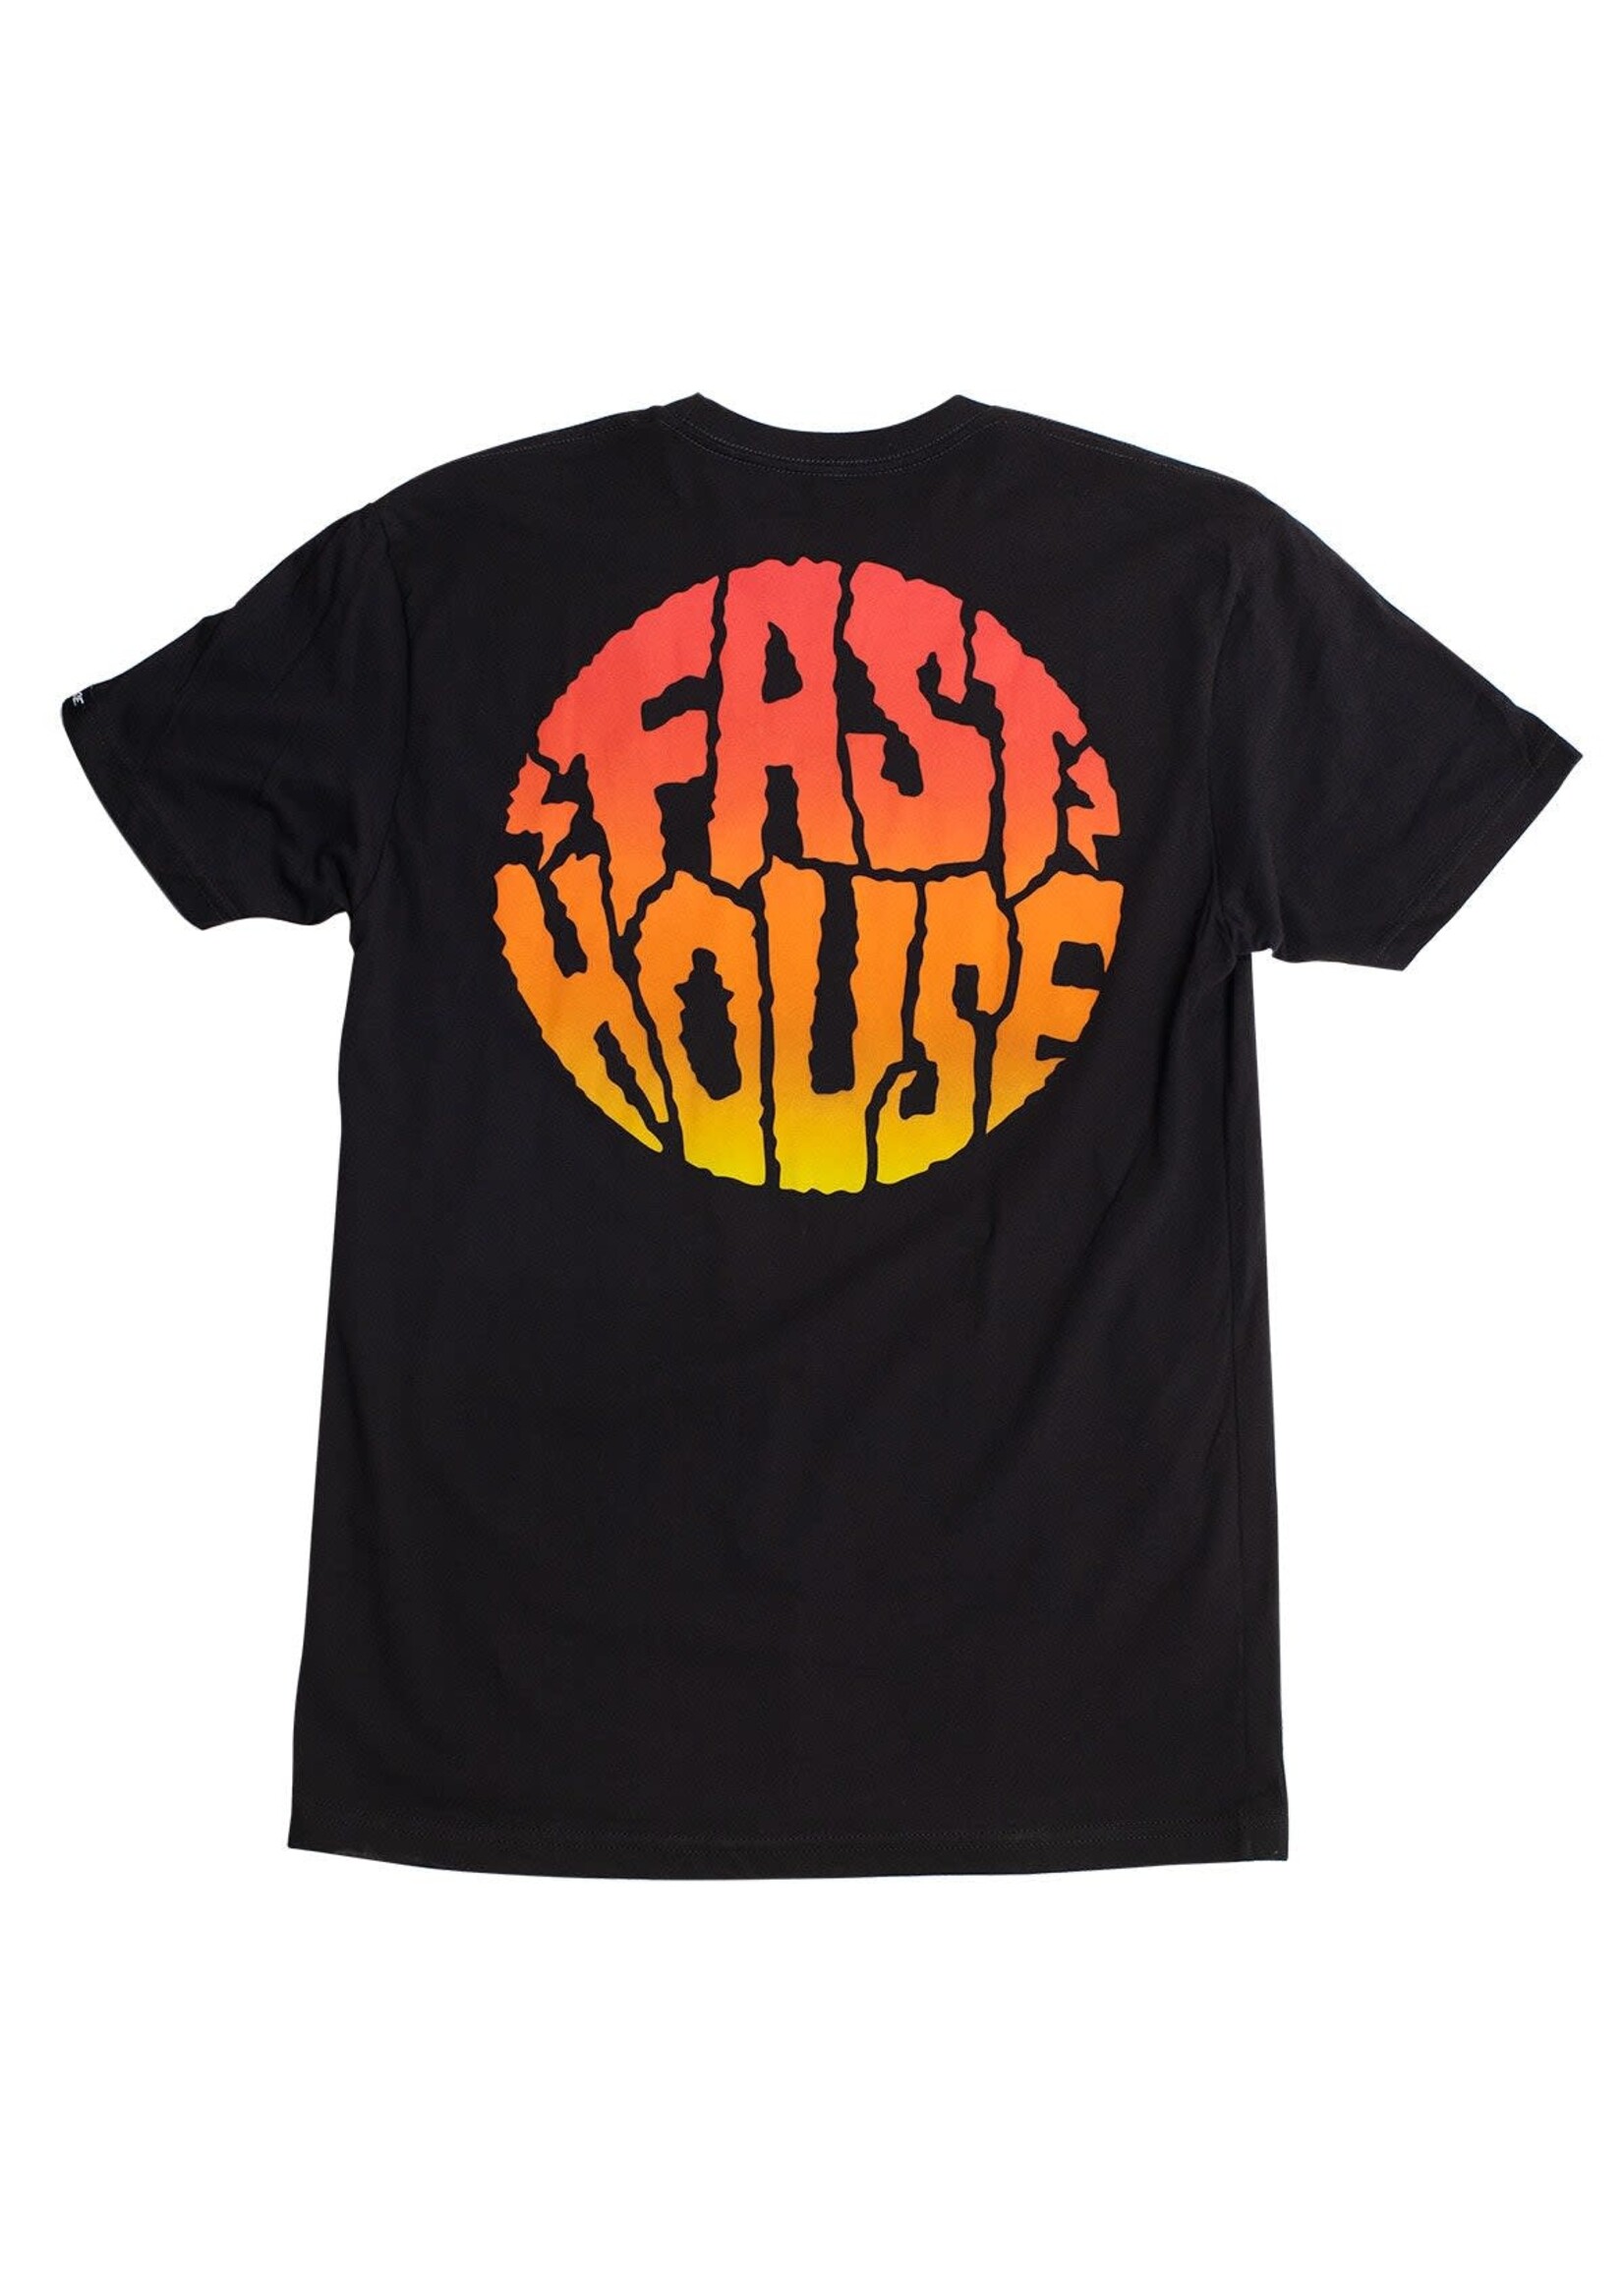 FASTHOUSE Grime Tee, Black